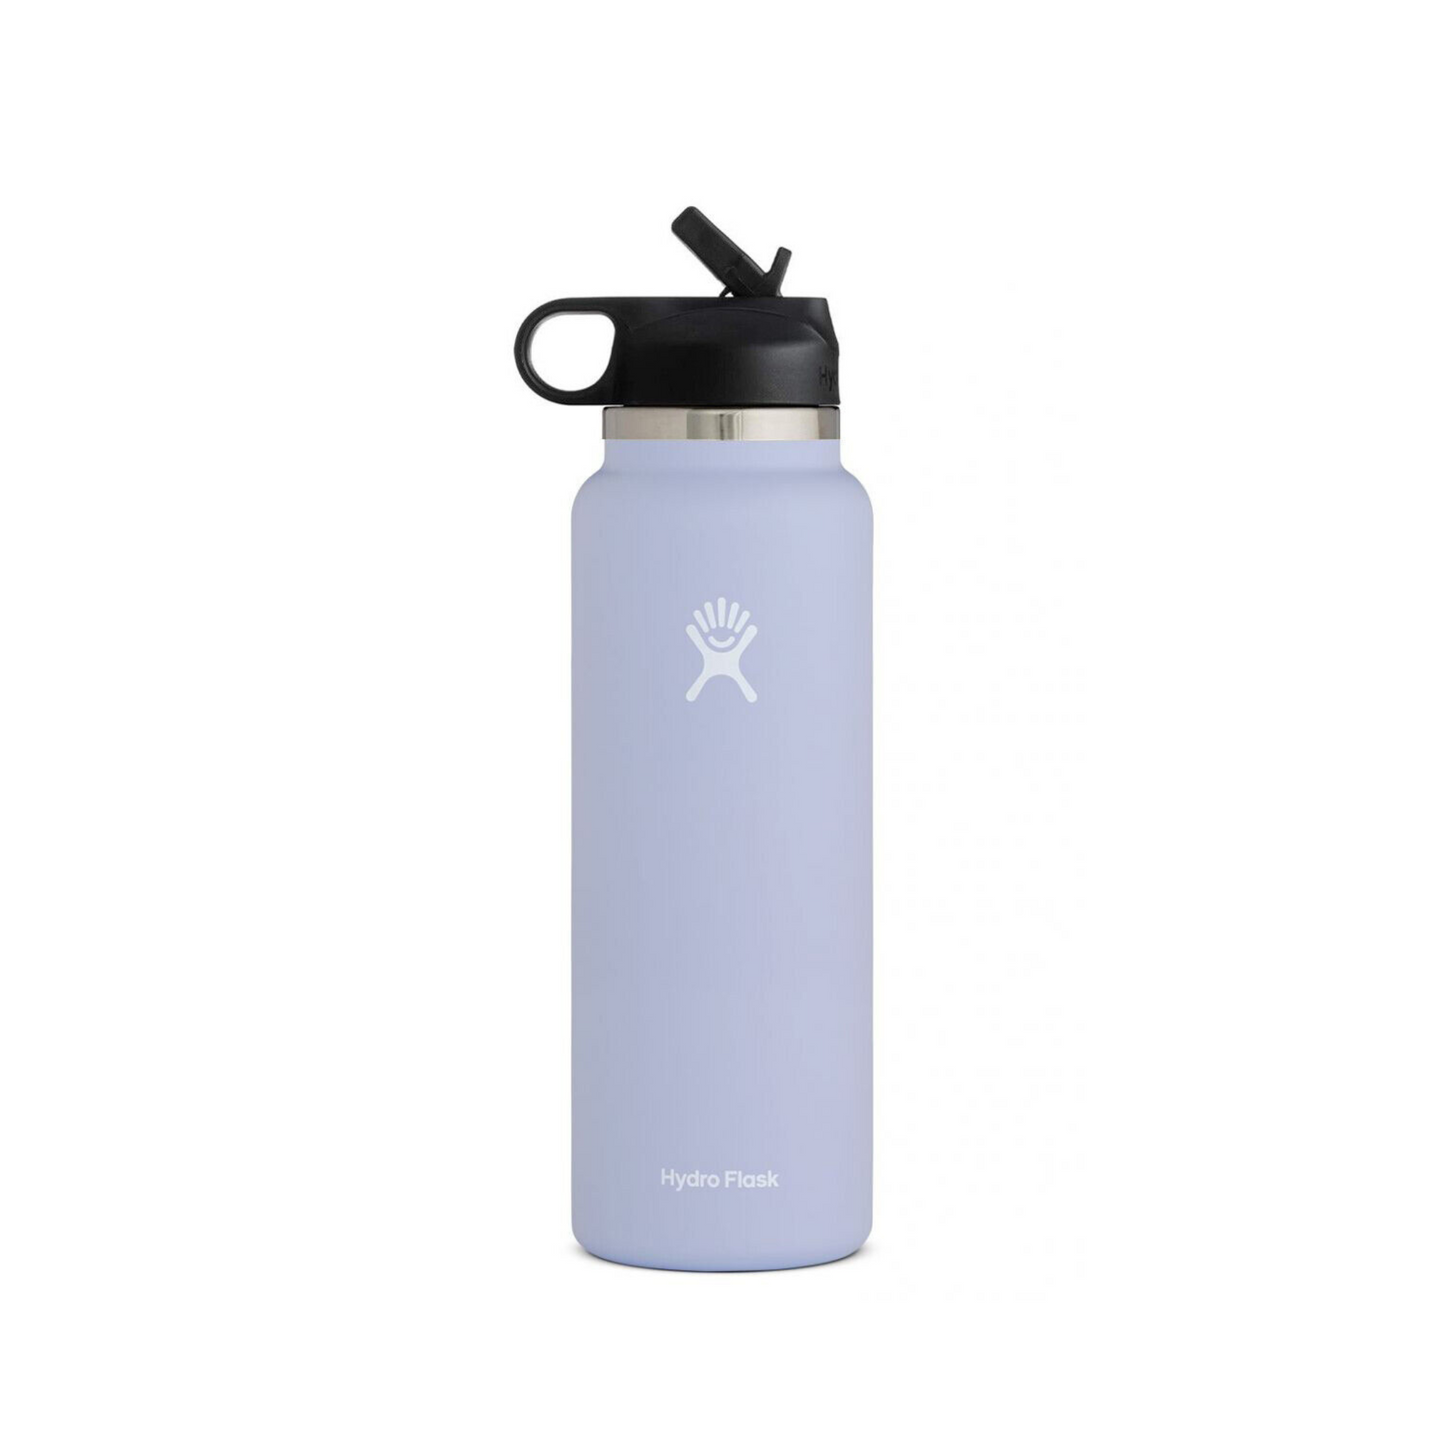 Fog 40oz Hydro Flask - Insulated Stainless Steel Water Bottle for Hydration on the Go